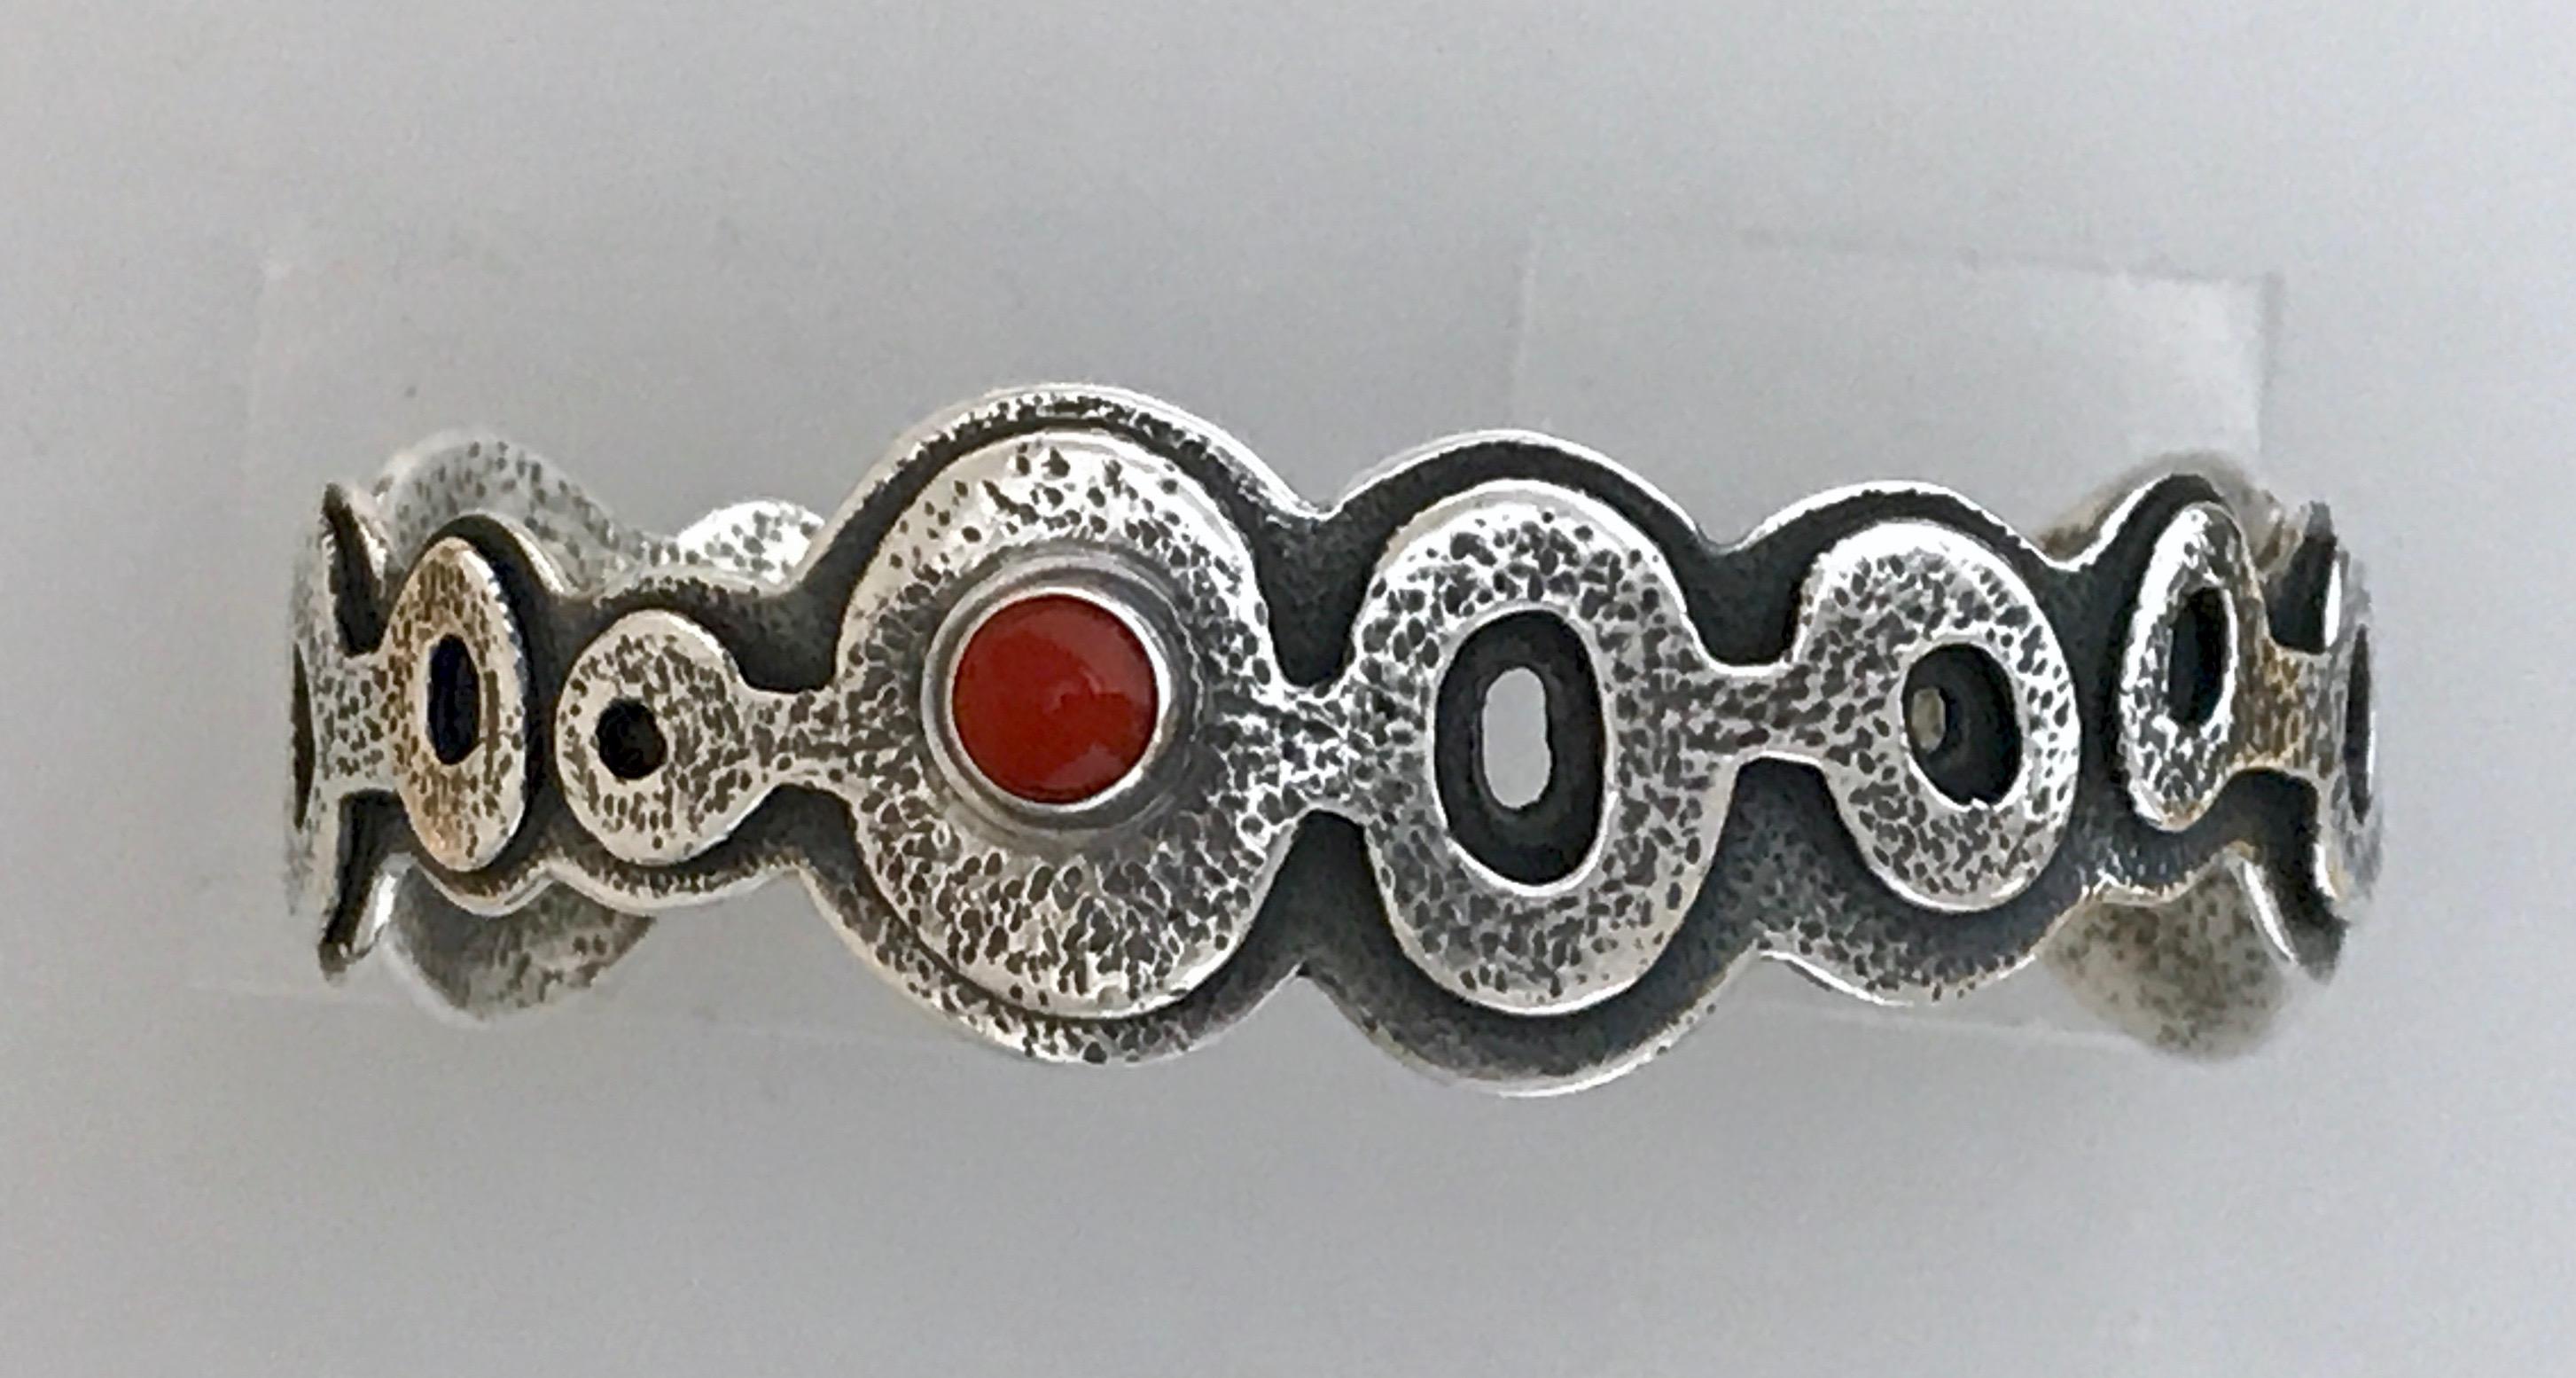 Cast sterling silver bracelet with red Italian coral cabochon. 5.5